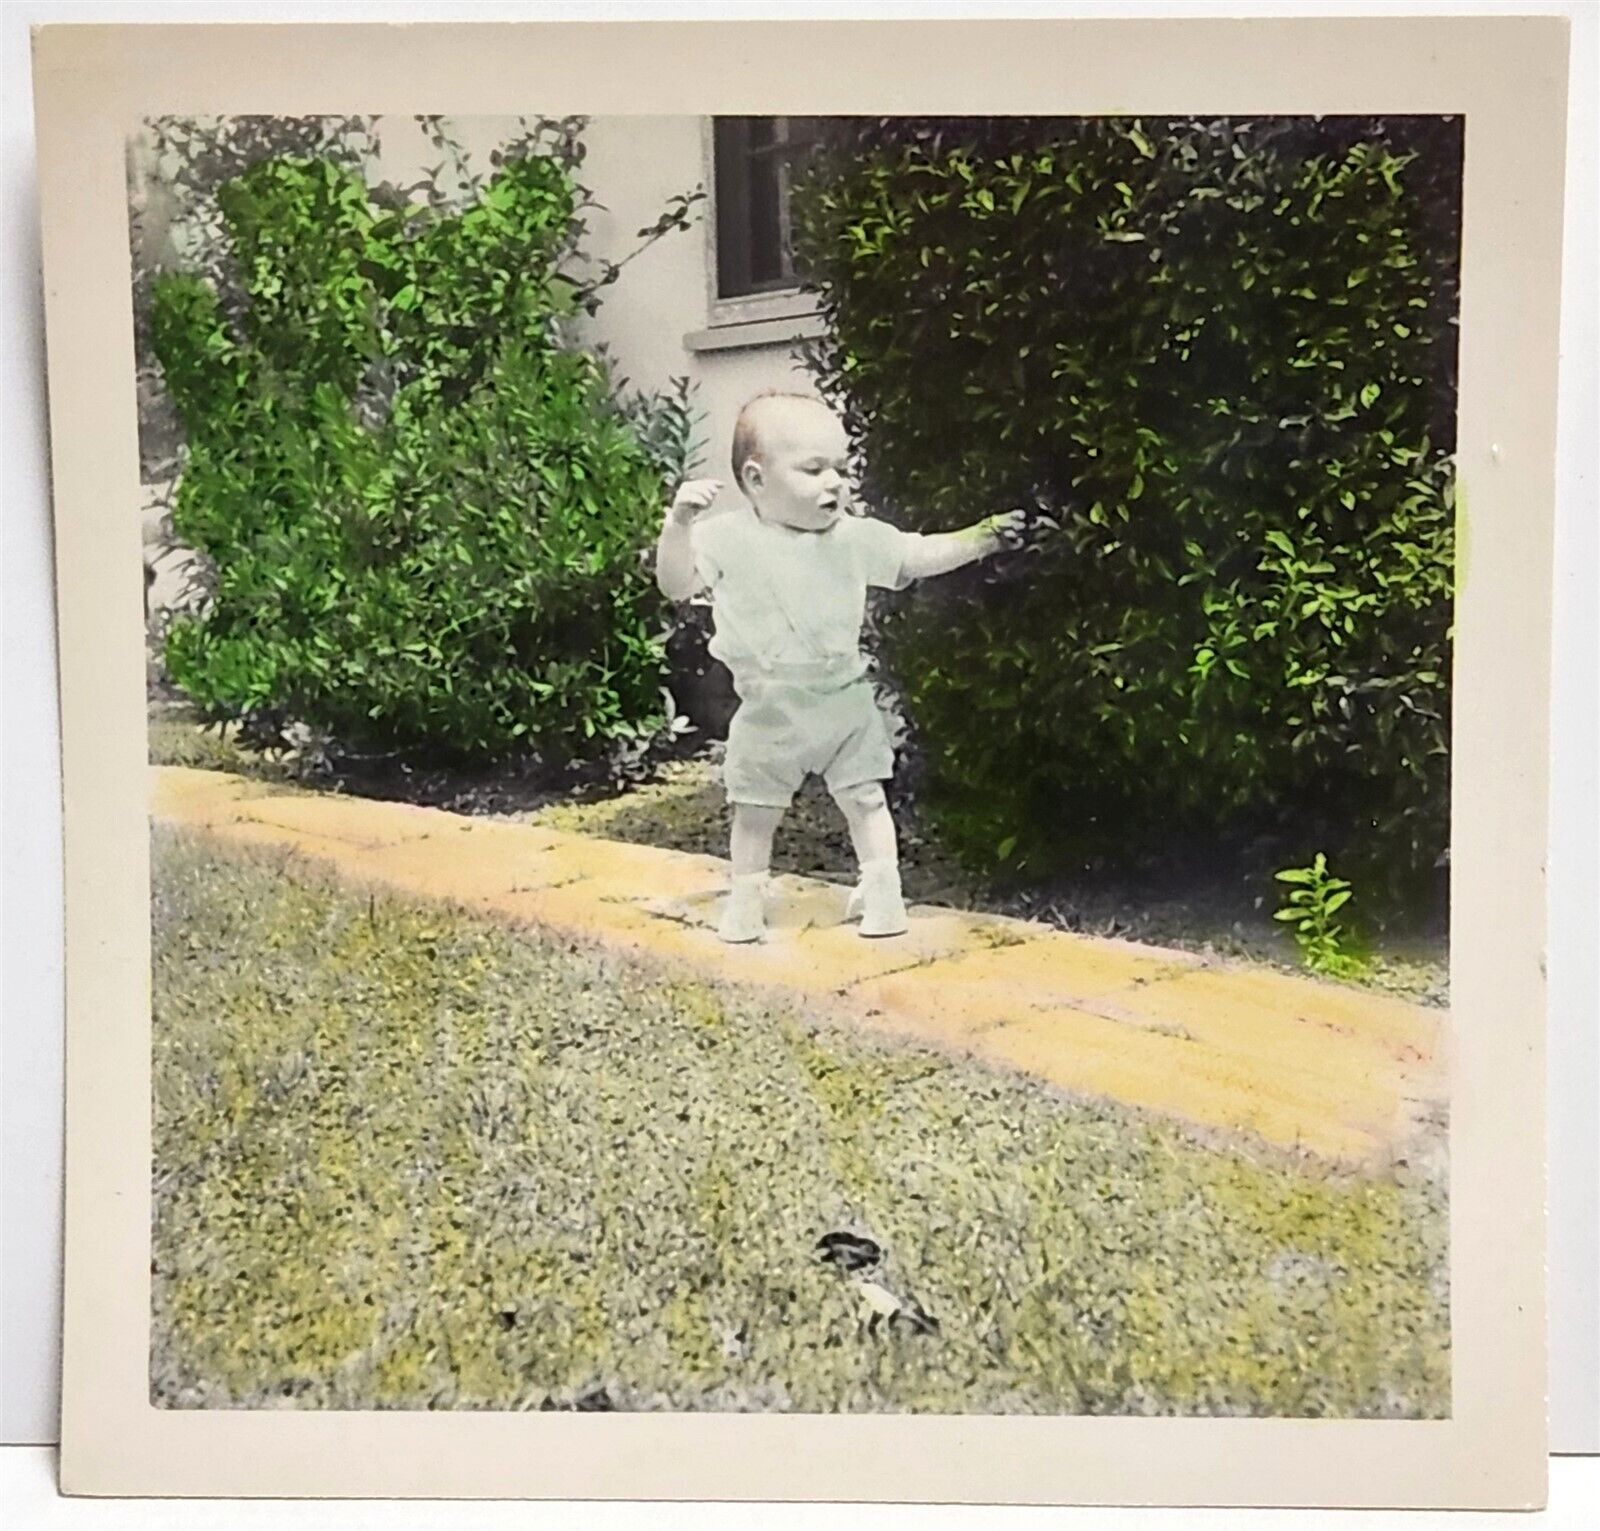 Tinted Photo 10 Month Old Jerry Walking - Amateur Coloring VTG Photo A9